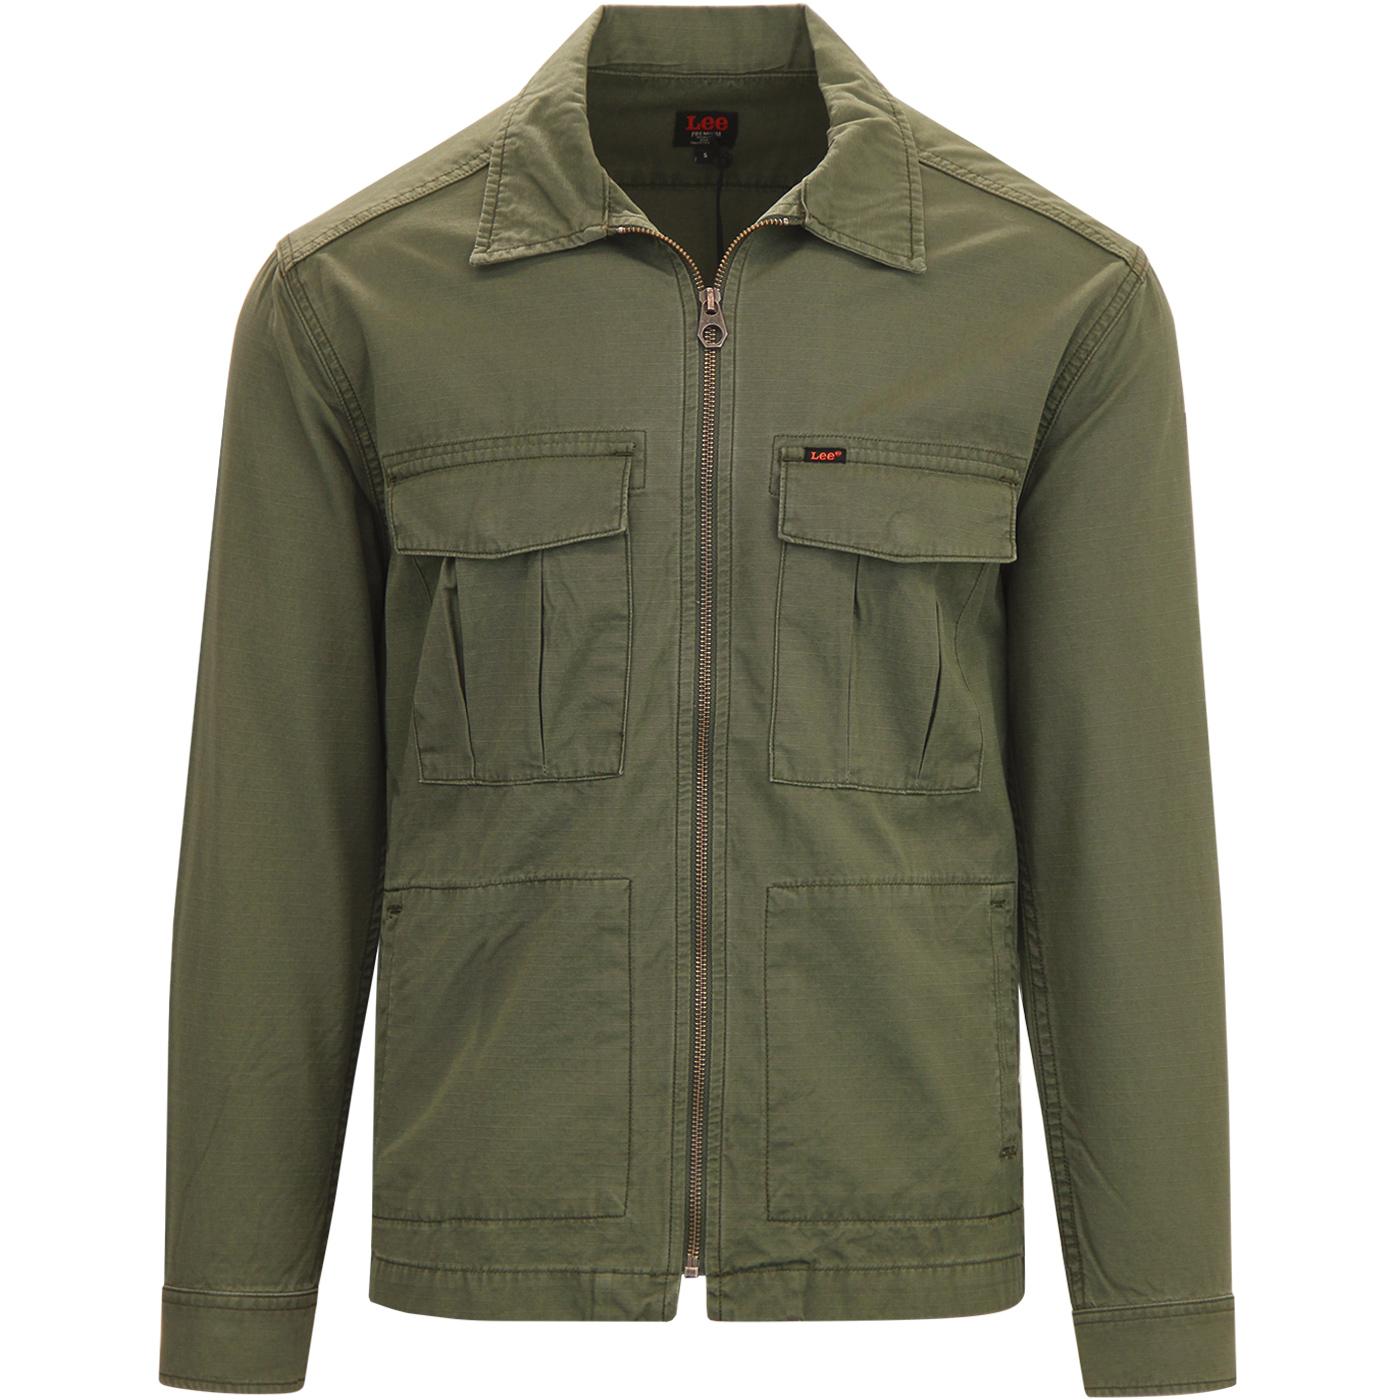 LEE JEANS Retro Military Fatigue Overshirt Jacket in Green